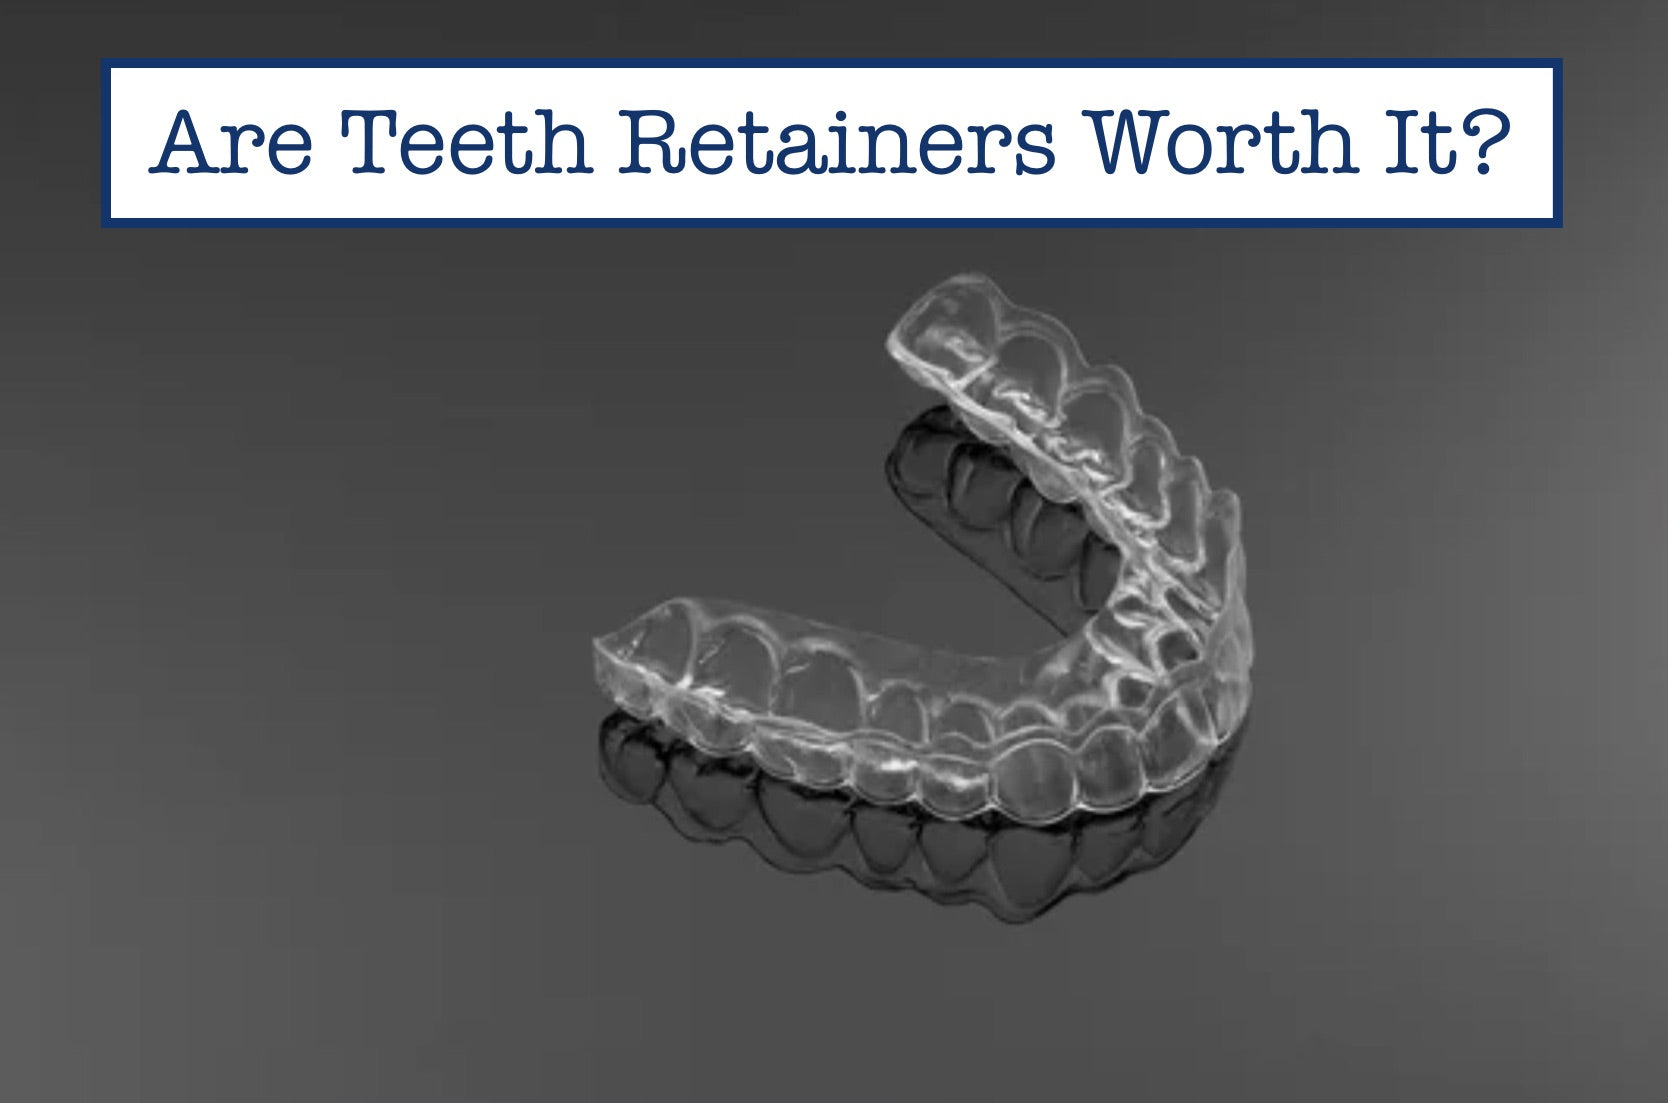 Are Teeth Retainers Worth It?